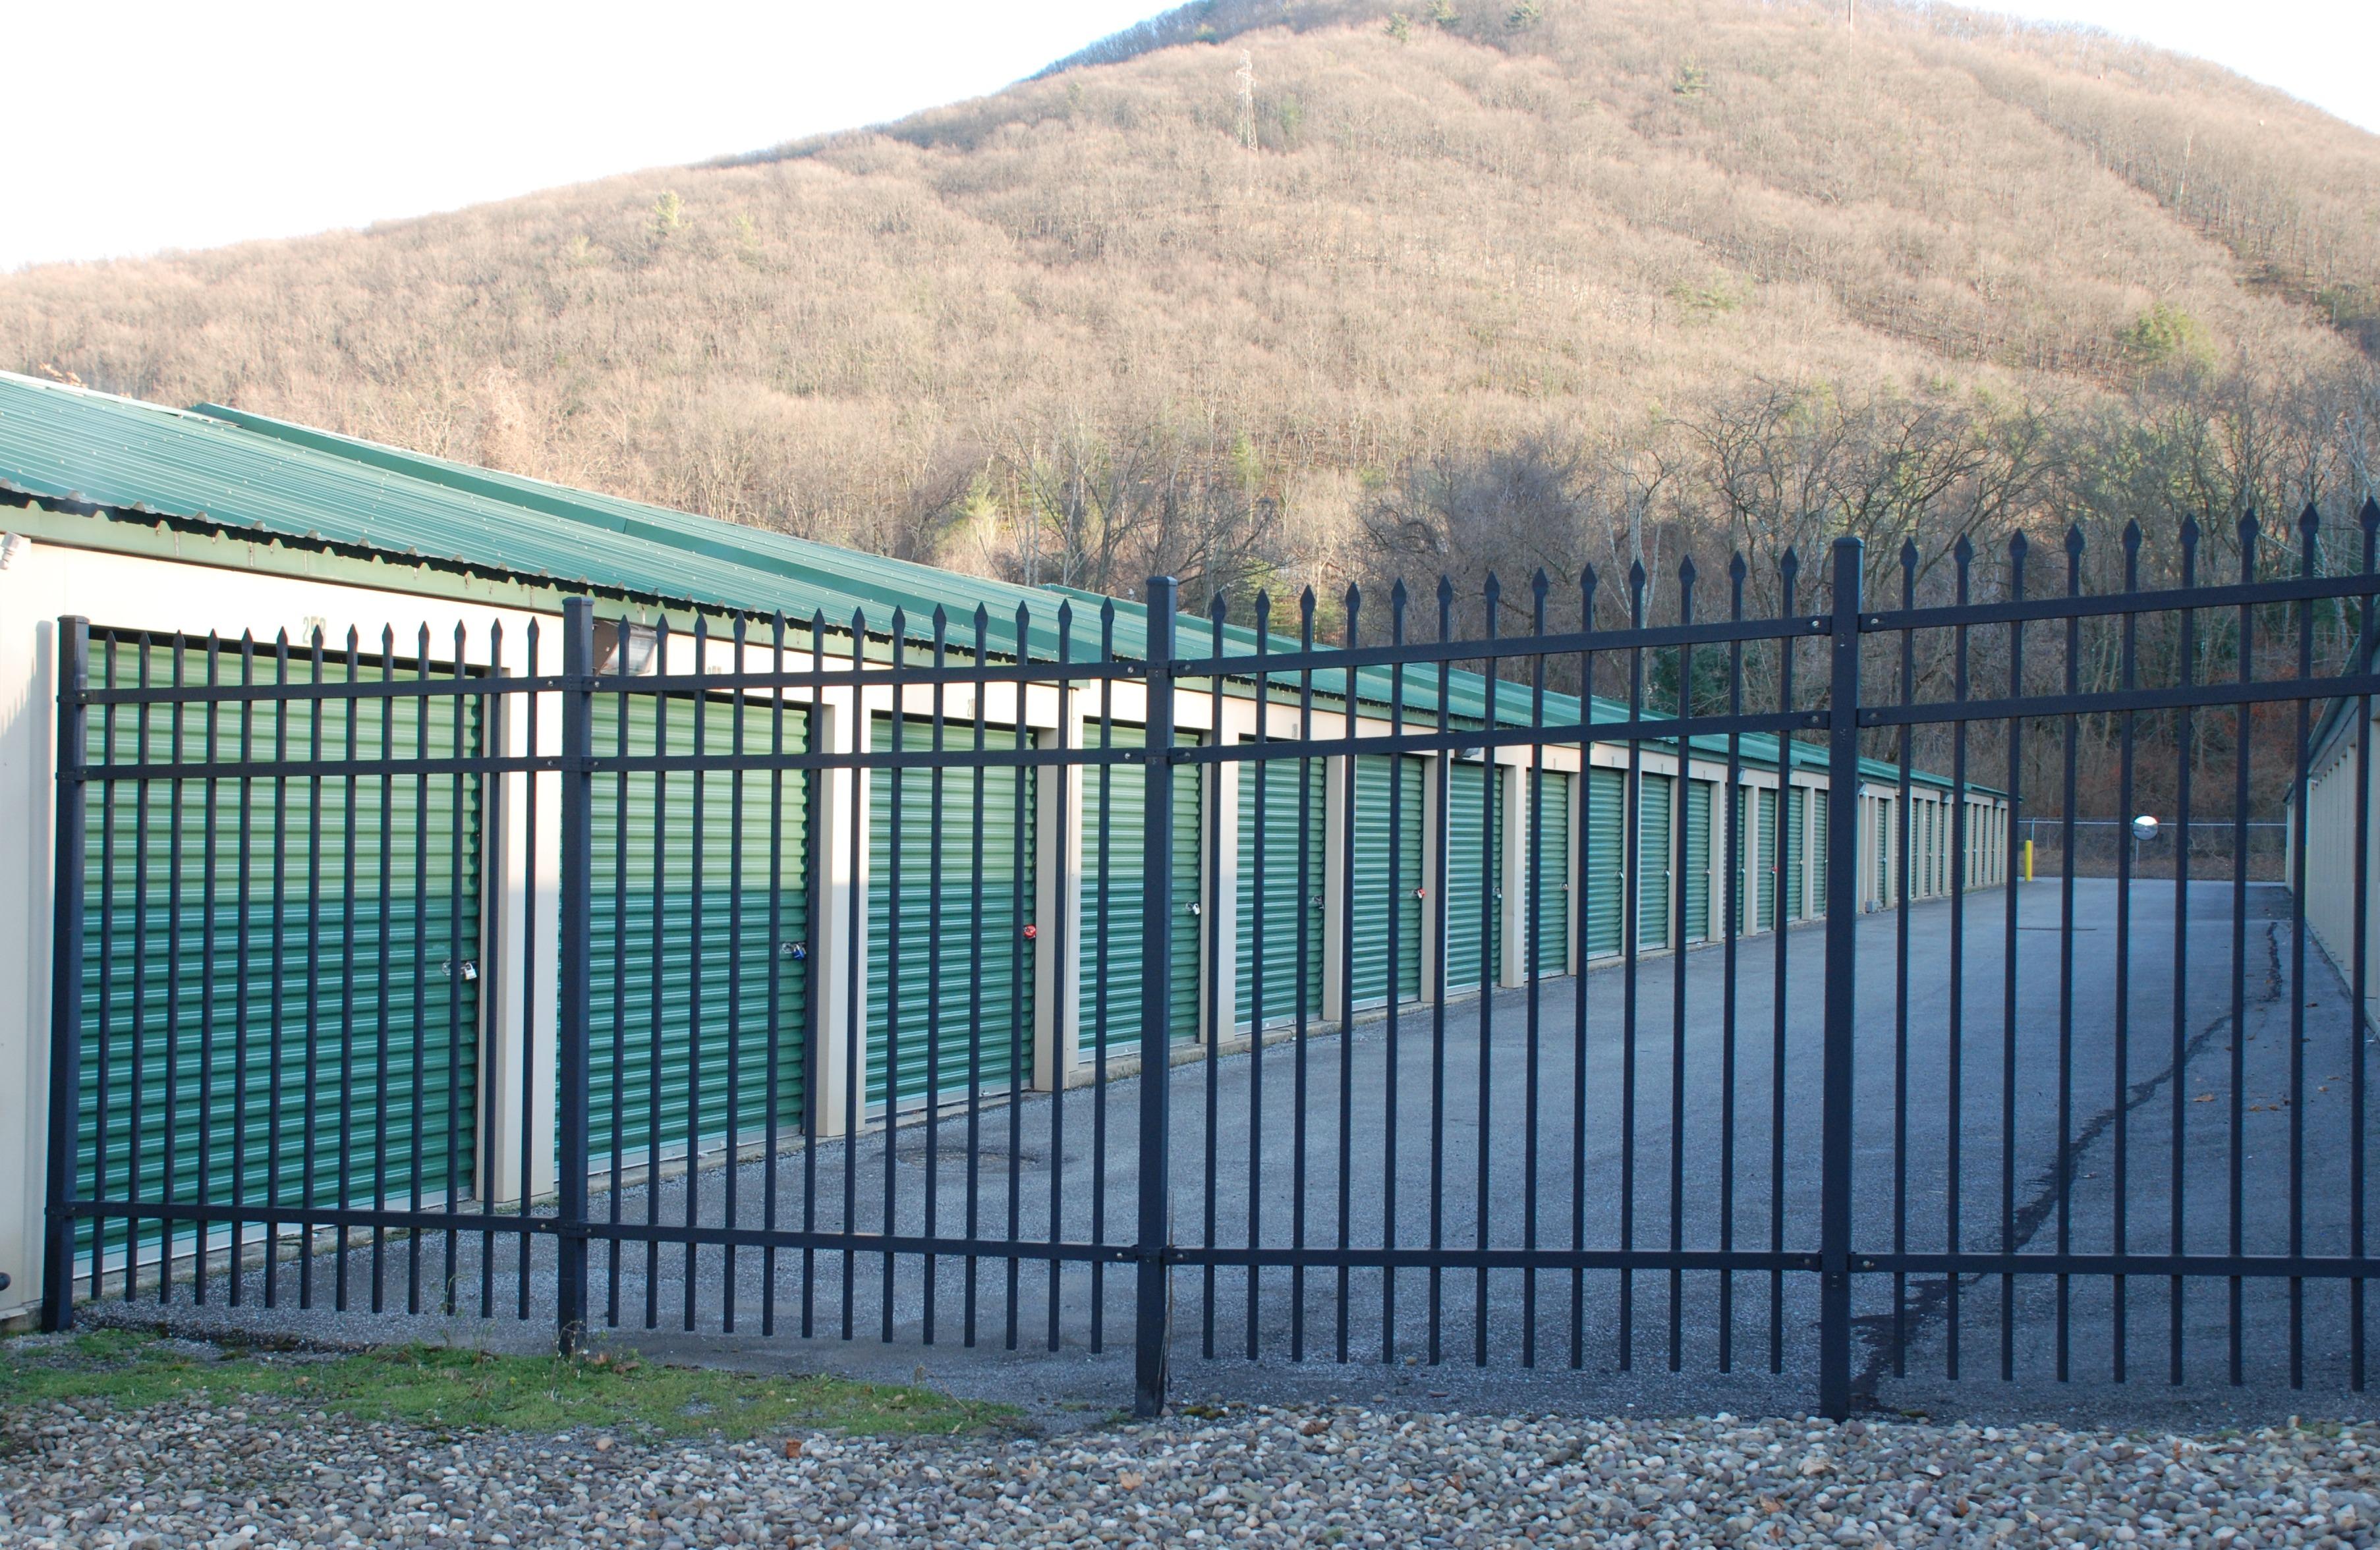 Our facility is fully fenced and gated via keypad entry